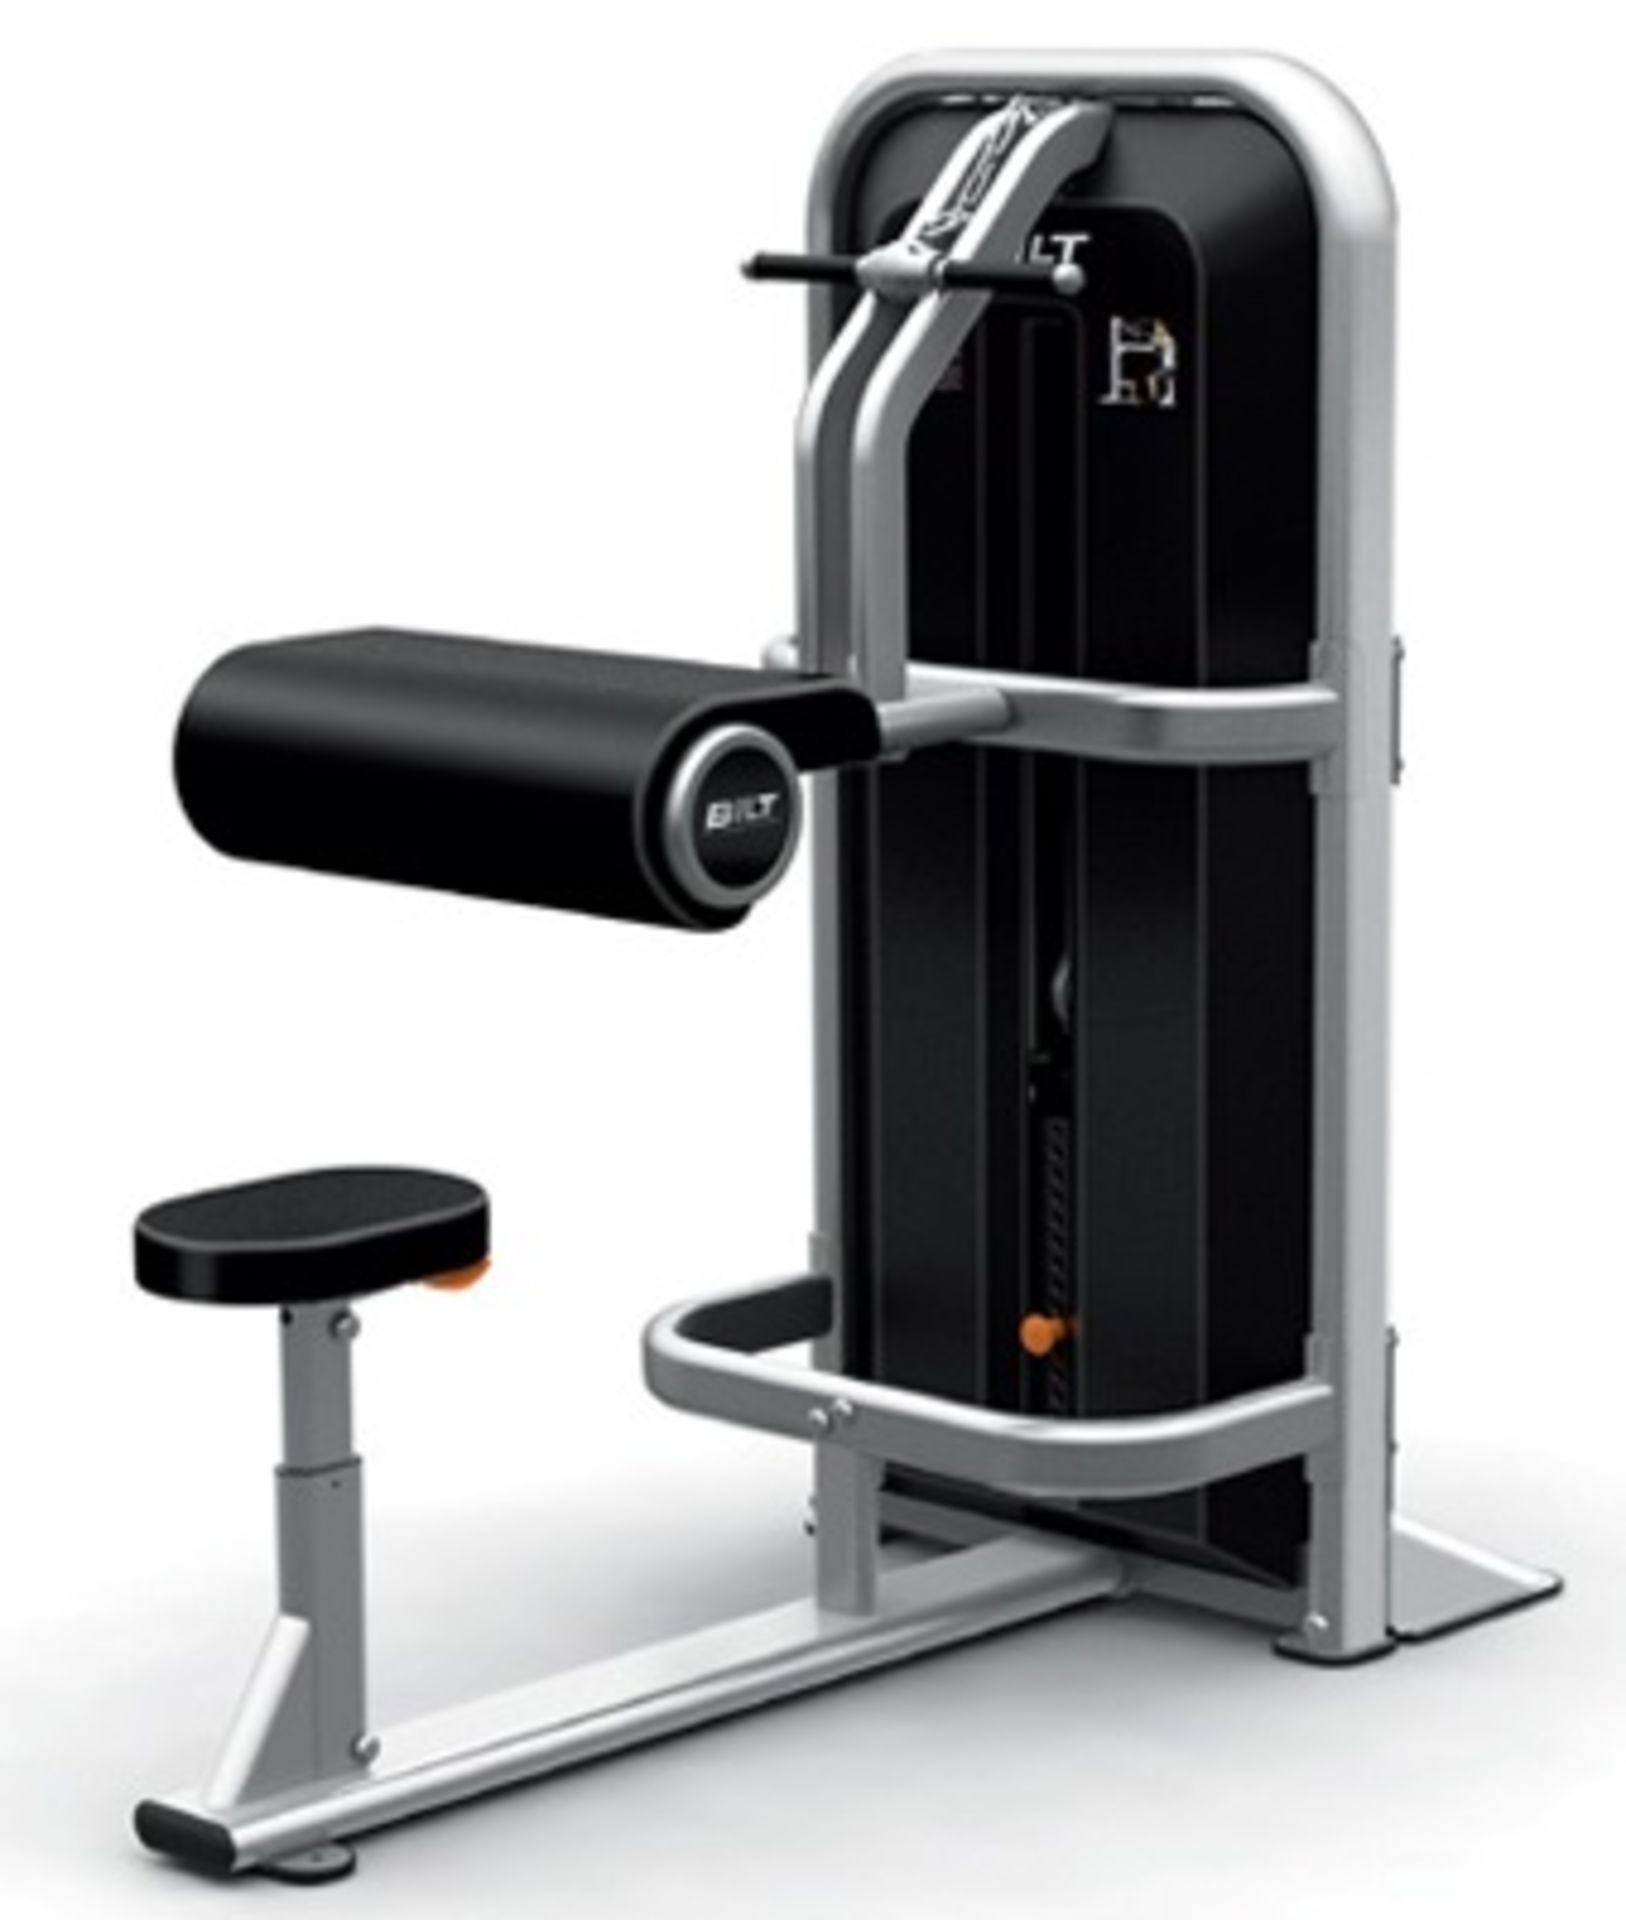 1 x BILT 'ISOCURL' Commercial Gym Machine By Agassi & Reyes - BCIC01 - New / Boxed Stock